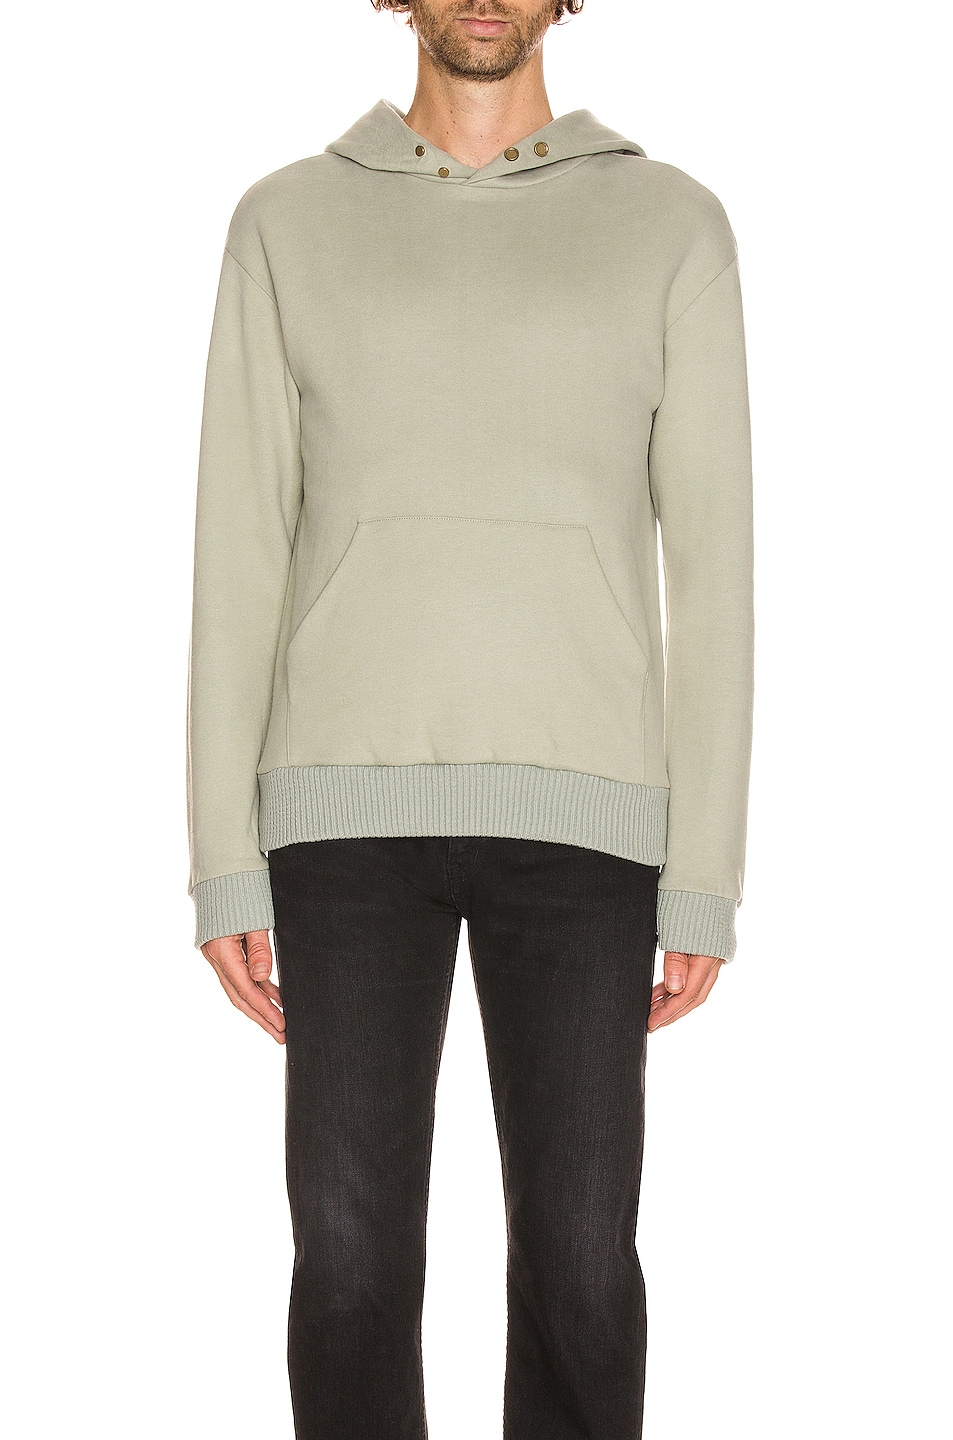 Fear of God Exclusively for Ermenegildo Zegna Slim Fit Hoodie in London ...